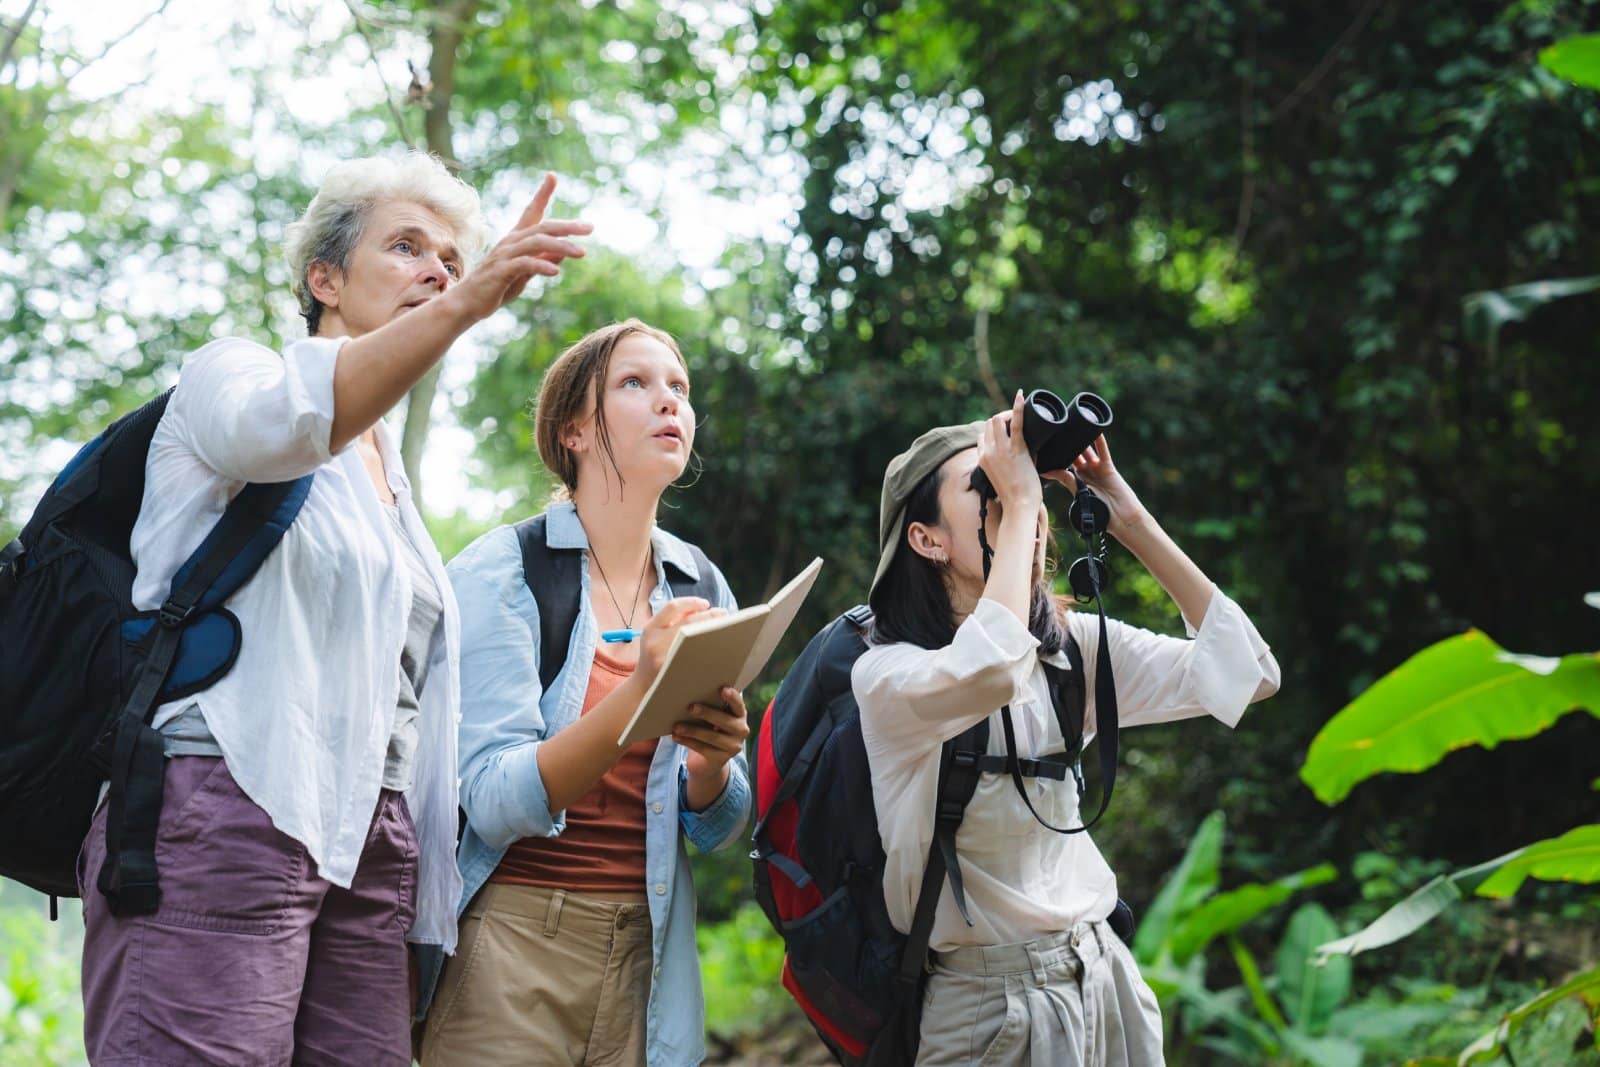 <p class="wp-caption-text">Image Credit: Shutterstock / Chokniti-Studio</p>  <p><span>Participating in local conservation efforts during travels can provide a deeper connection to the destination and contribute positively to its environmental preservation. Many communities and conservation organizations offer programs for travelers to get involved, whether through educational workshops, guided nature walks that emphasize conservation, or direct participation in conservation projects.</span></p> <p><b>Insider’s Tip: </b><span>Research local conservation initiatives before your trip and ask how you can participate. Activities like guided bird-watching tours or reef-safe snorkeling excursions can support conservation through education and awareness.</span></p> <p><b>When to Travel: </b><span>The timing for participating in conservation efforts varies by the project and destination. Some seasonal conservation activities correspond with animal migrations or specific environmental conditions.</span></p> <p><b>How to Get There: </b><span>Choosing conservation activities and projects accessible by public transportation or that provide their own eco-friendly transport solutions is ideal.</span></p>